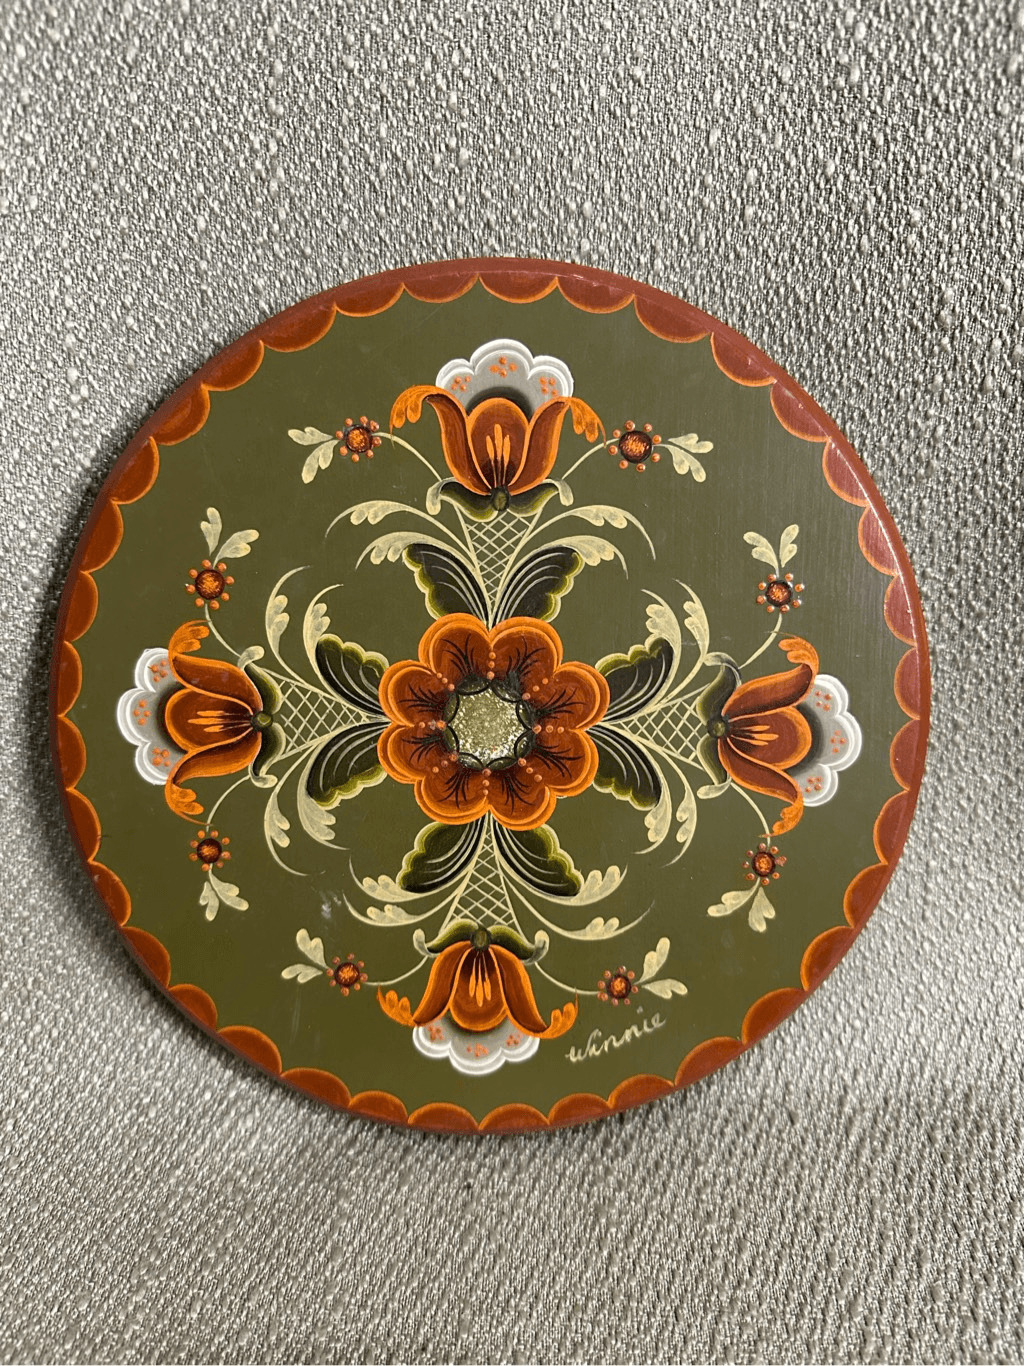 Norwegian Rosemaling Wooden Plate 7.5” Wall Hanging Hand Painted Signed Winnie